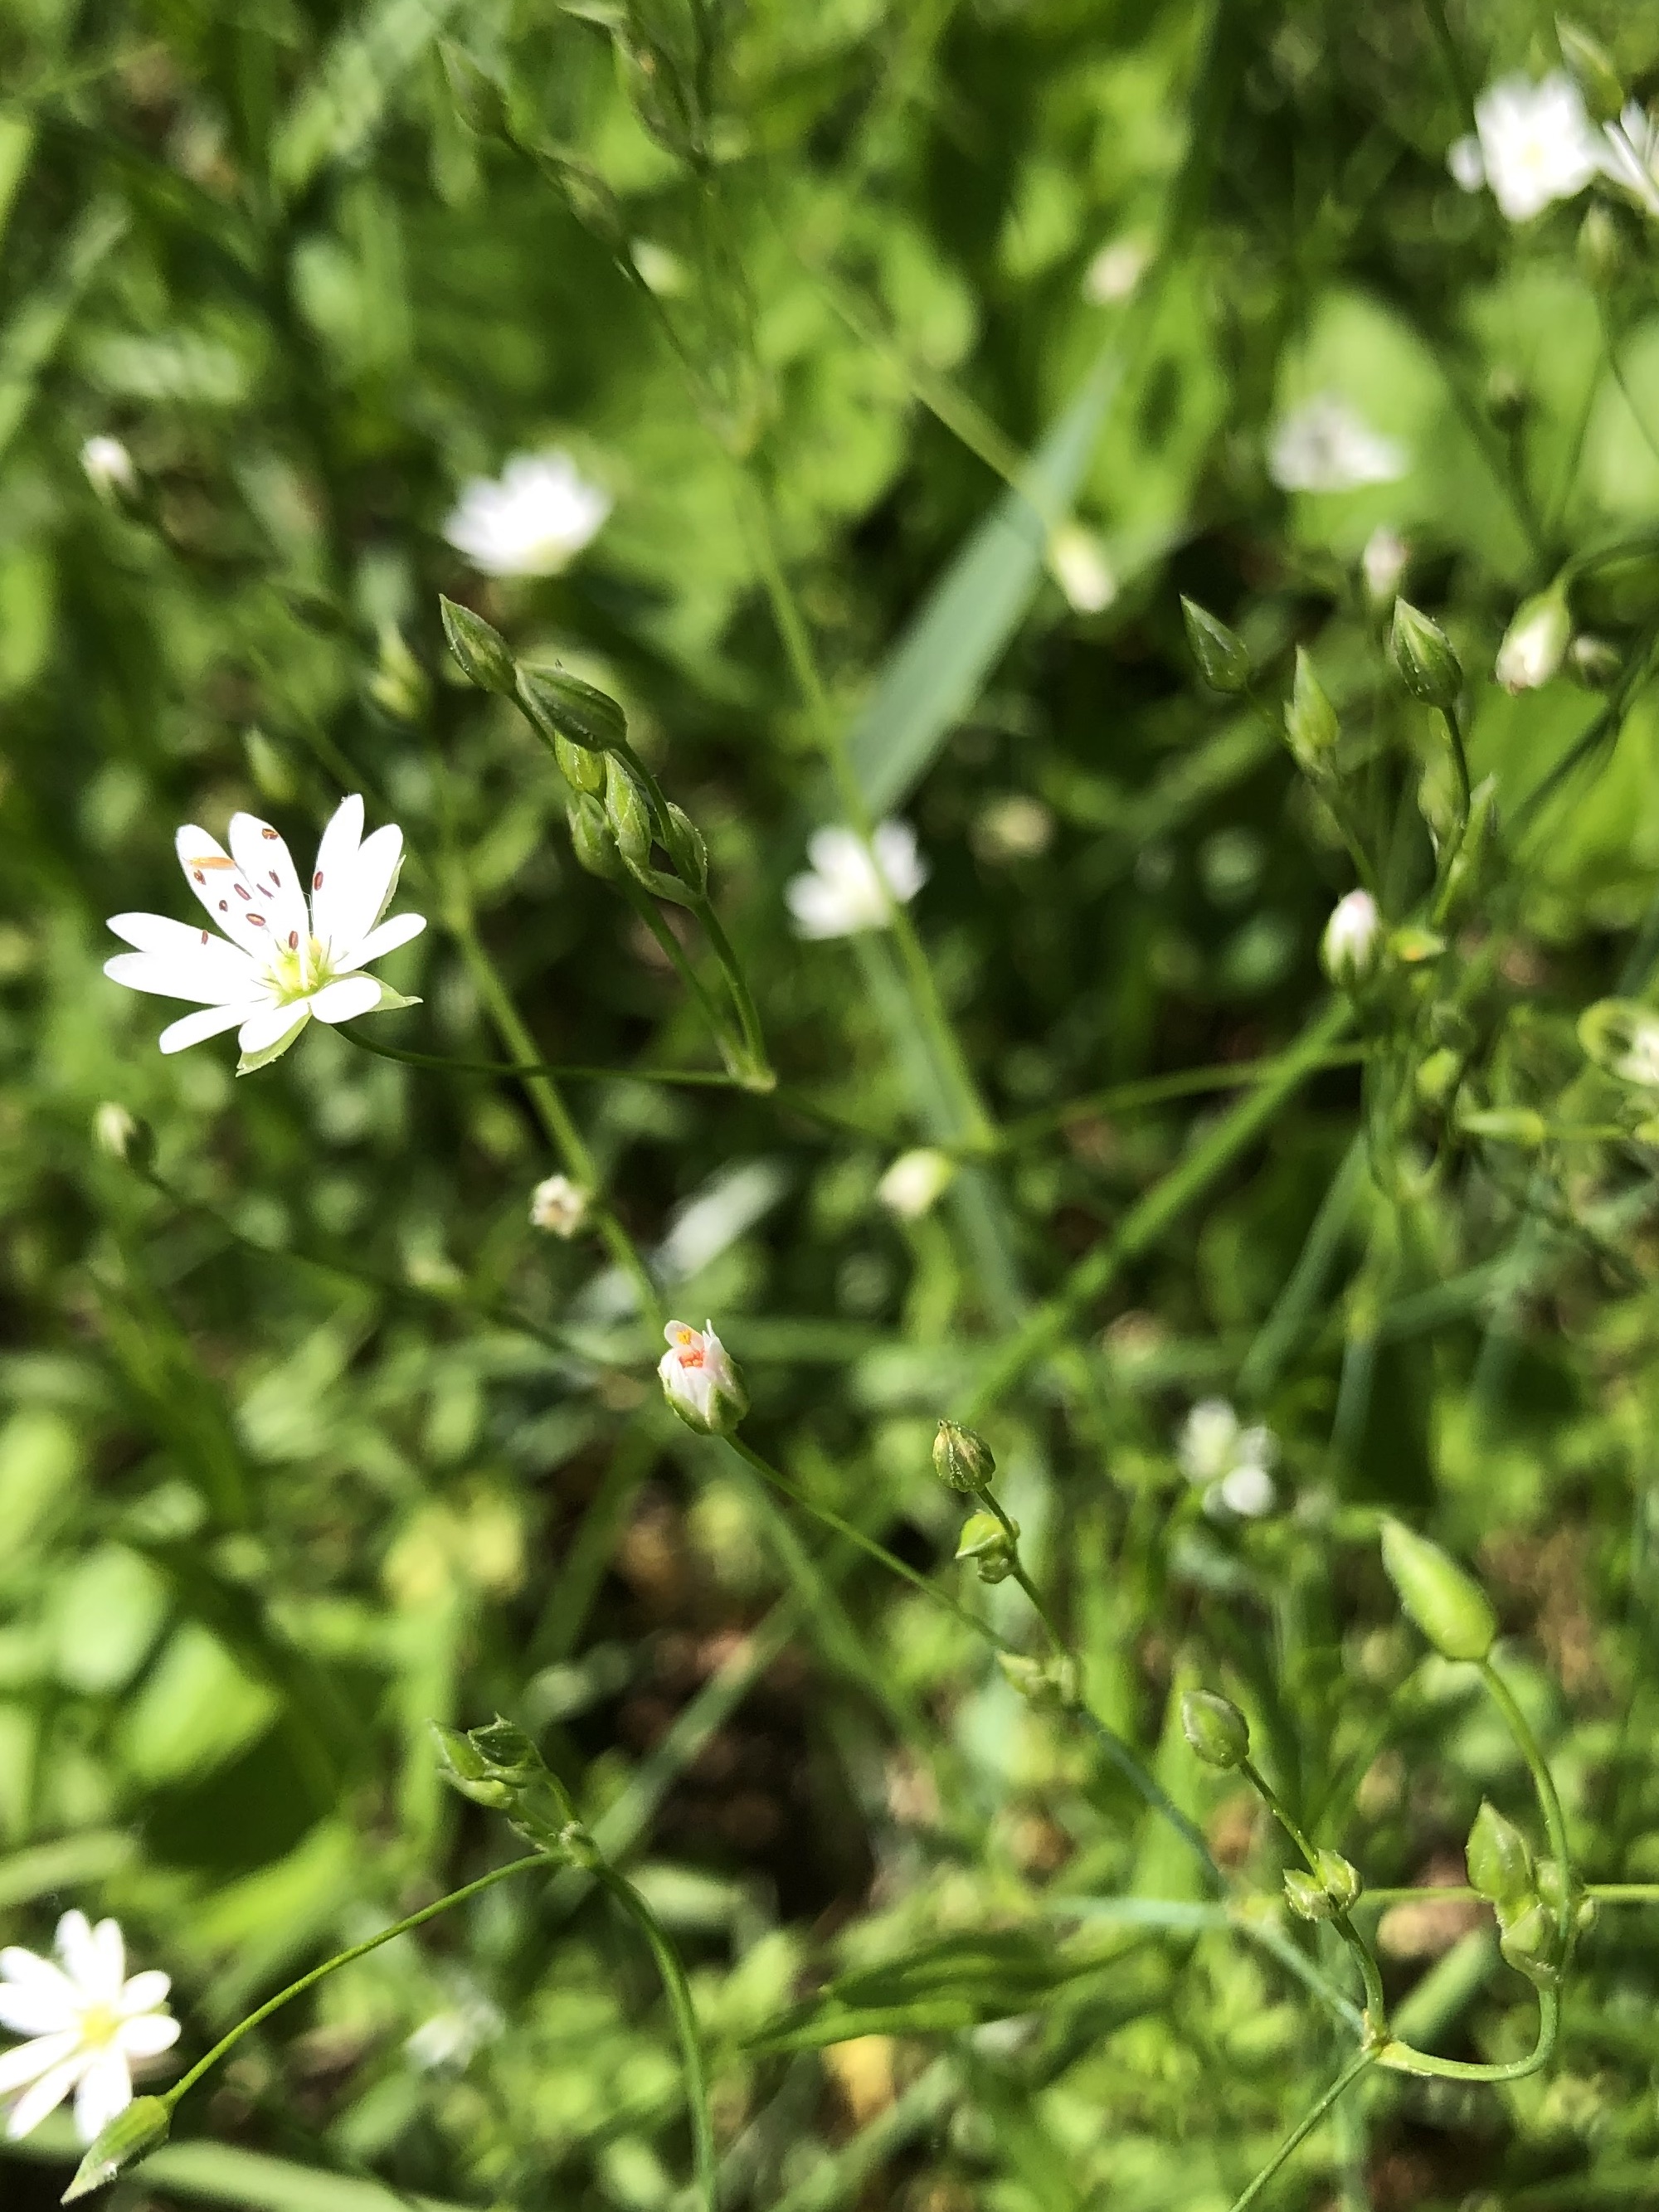 Common Stitchwort stems and leaves in a grassy clearing along the bike path between Odana Road and Midvale Boulevard in Madison, Wisconsin on June 2, 2022.